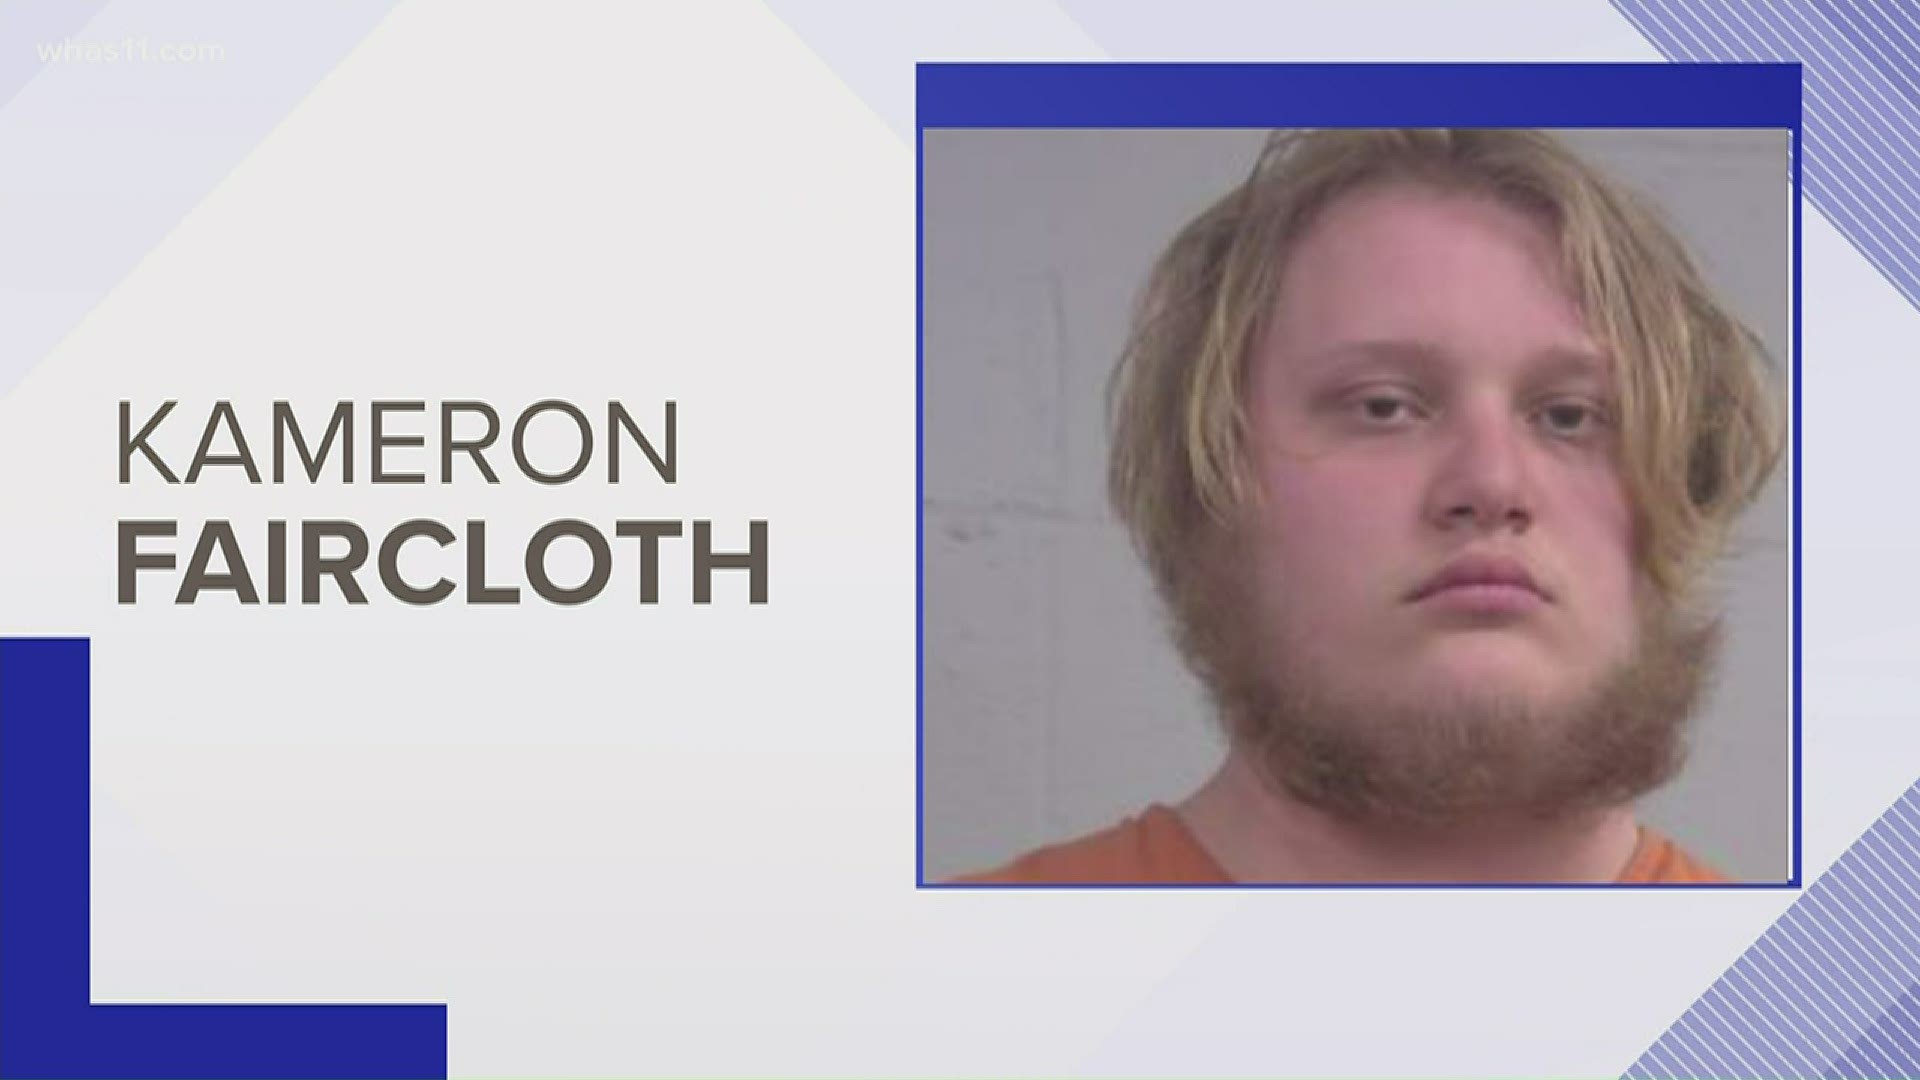 Kameron Faircloth is facing charges after an investigating revealed he shot at a car during a drug deal gone wrong, killing a 17-year-old.